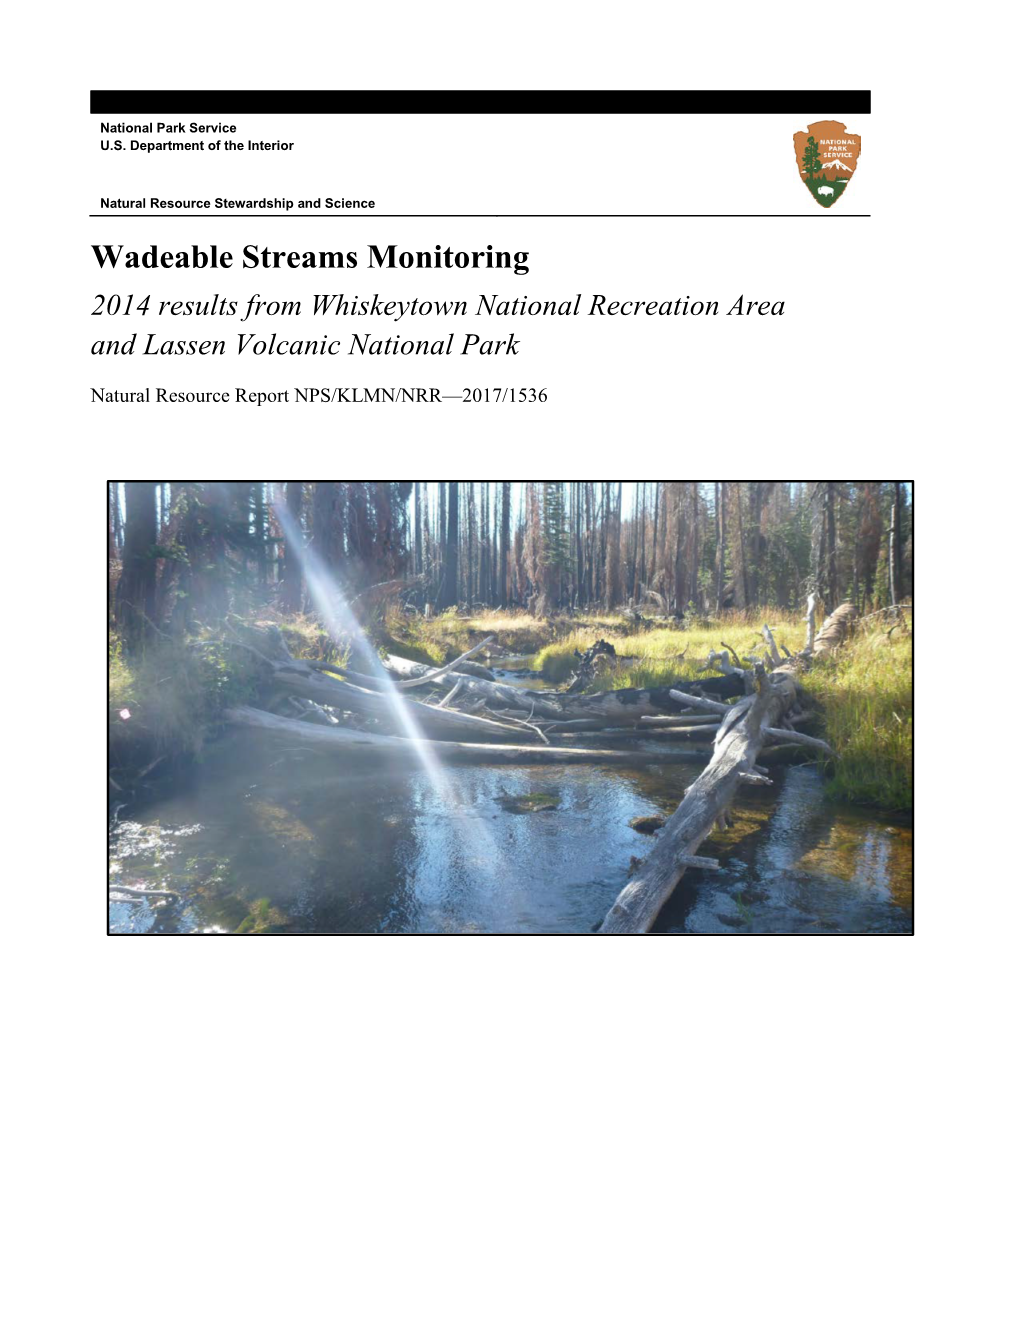 Wadeable Streams Monitoring: 2014 Results from Whiskeytown National Recreation Area and Lassen Volcanic National Park